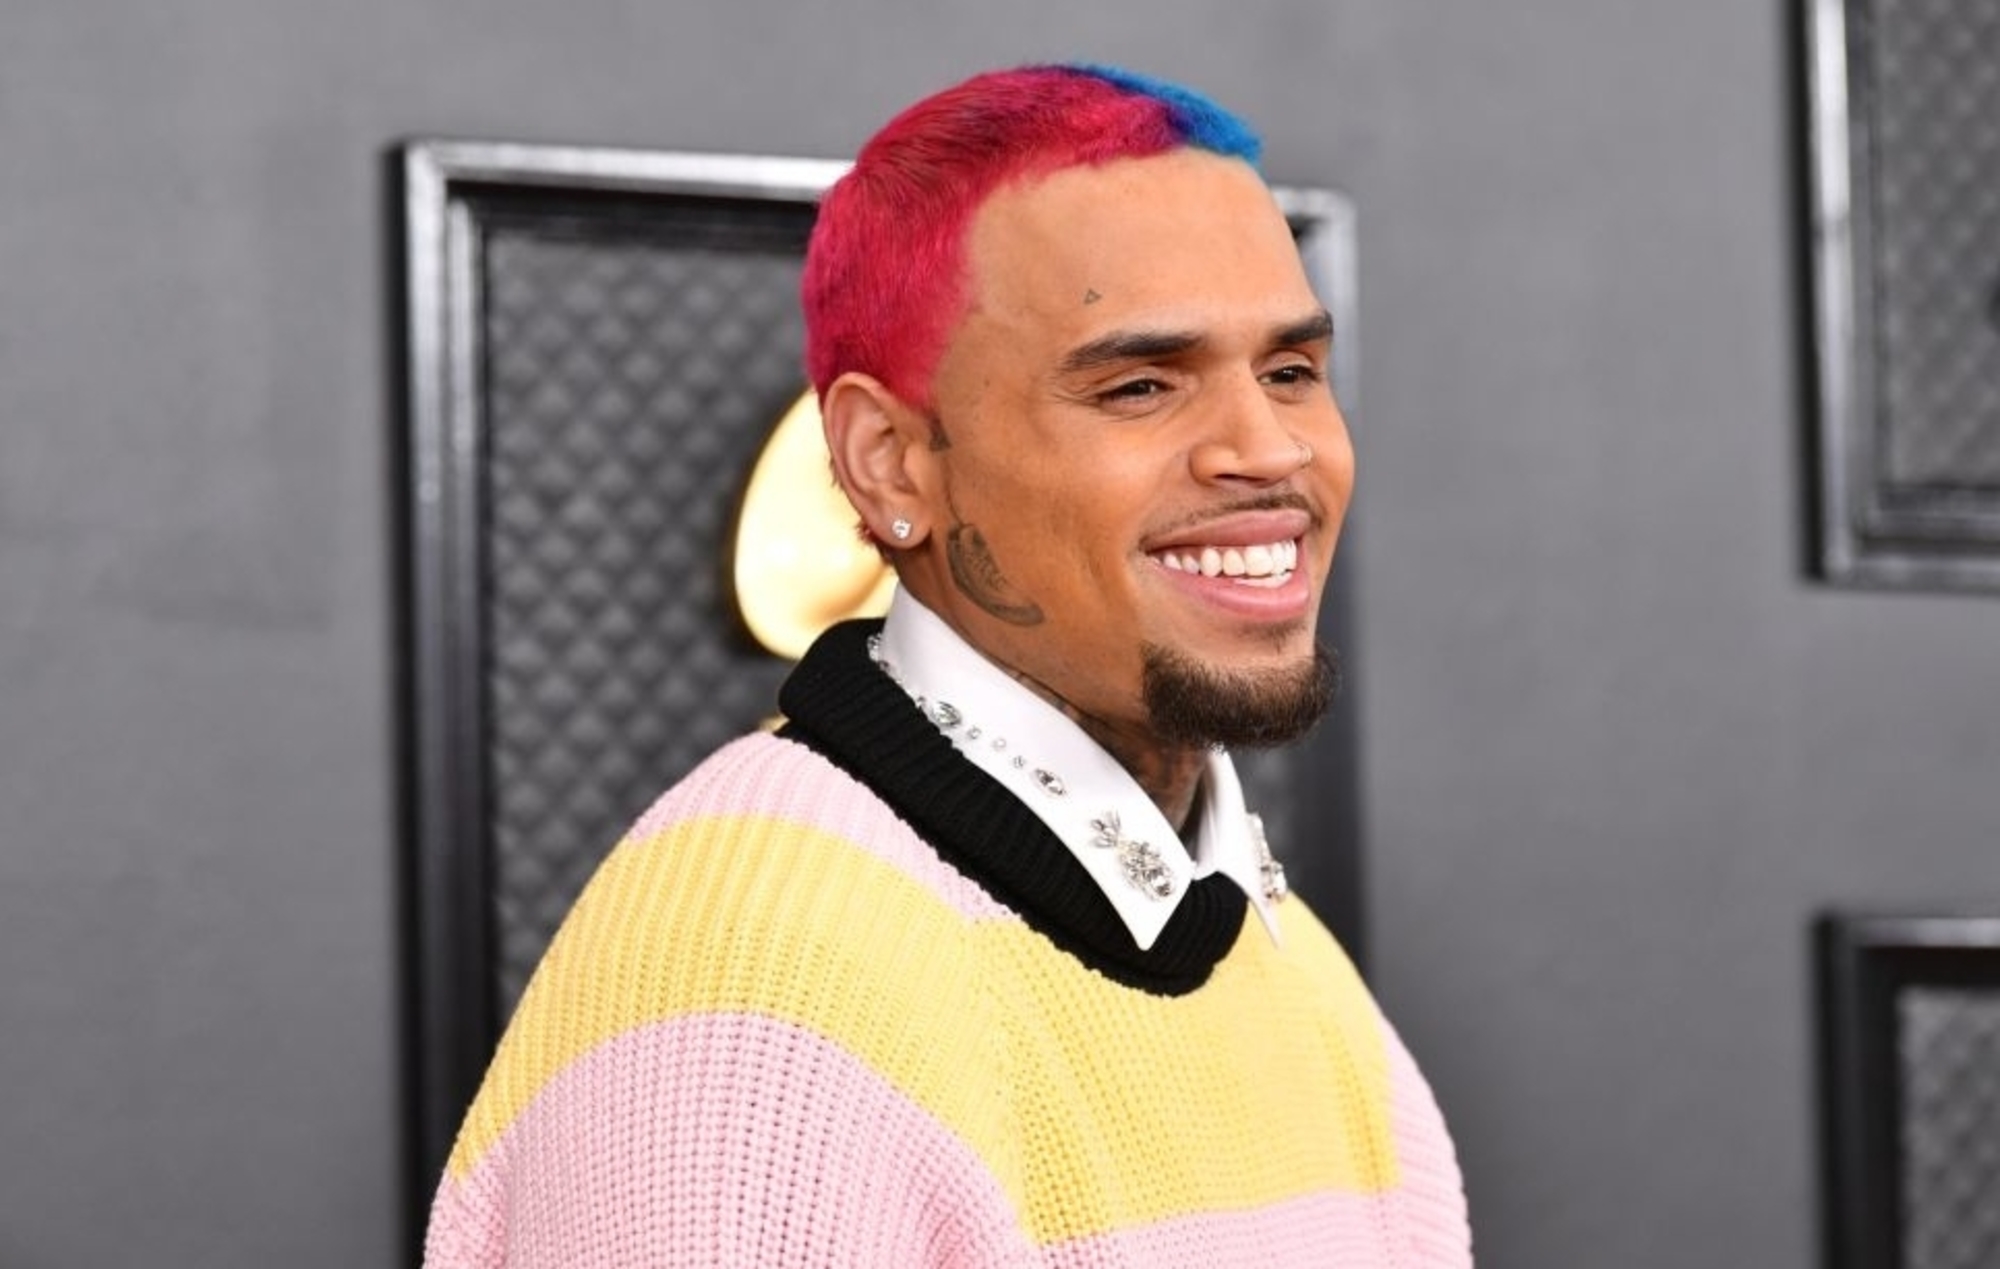 Chris Brown sexual assault lawsuit dismissed after singer settles out of court